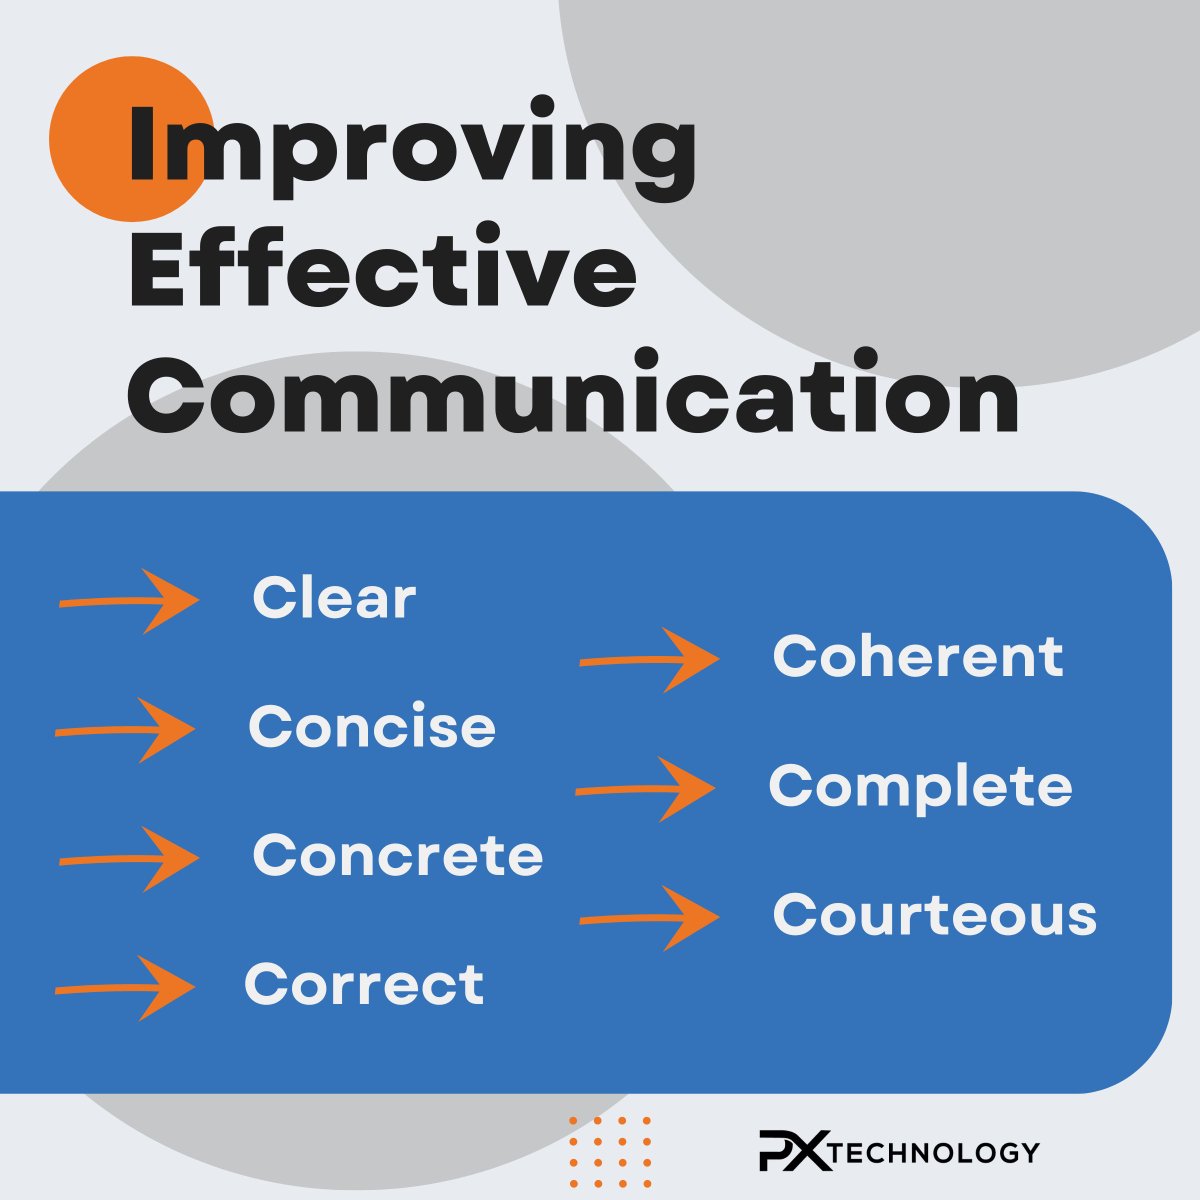 Whether you work with 10 or 200+ employees, effective communication, or lack thereof, will make or break a company. So, what are some ways to better communicate as an employee to boost productivity at work? The 7Cs are a good place to start. #effectivecommunication